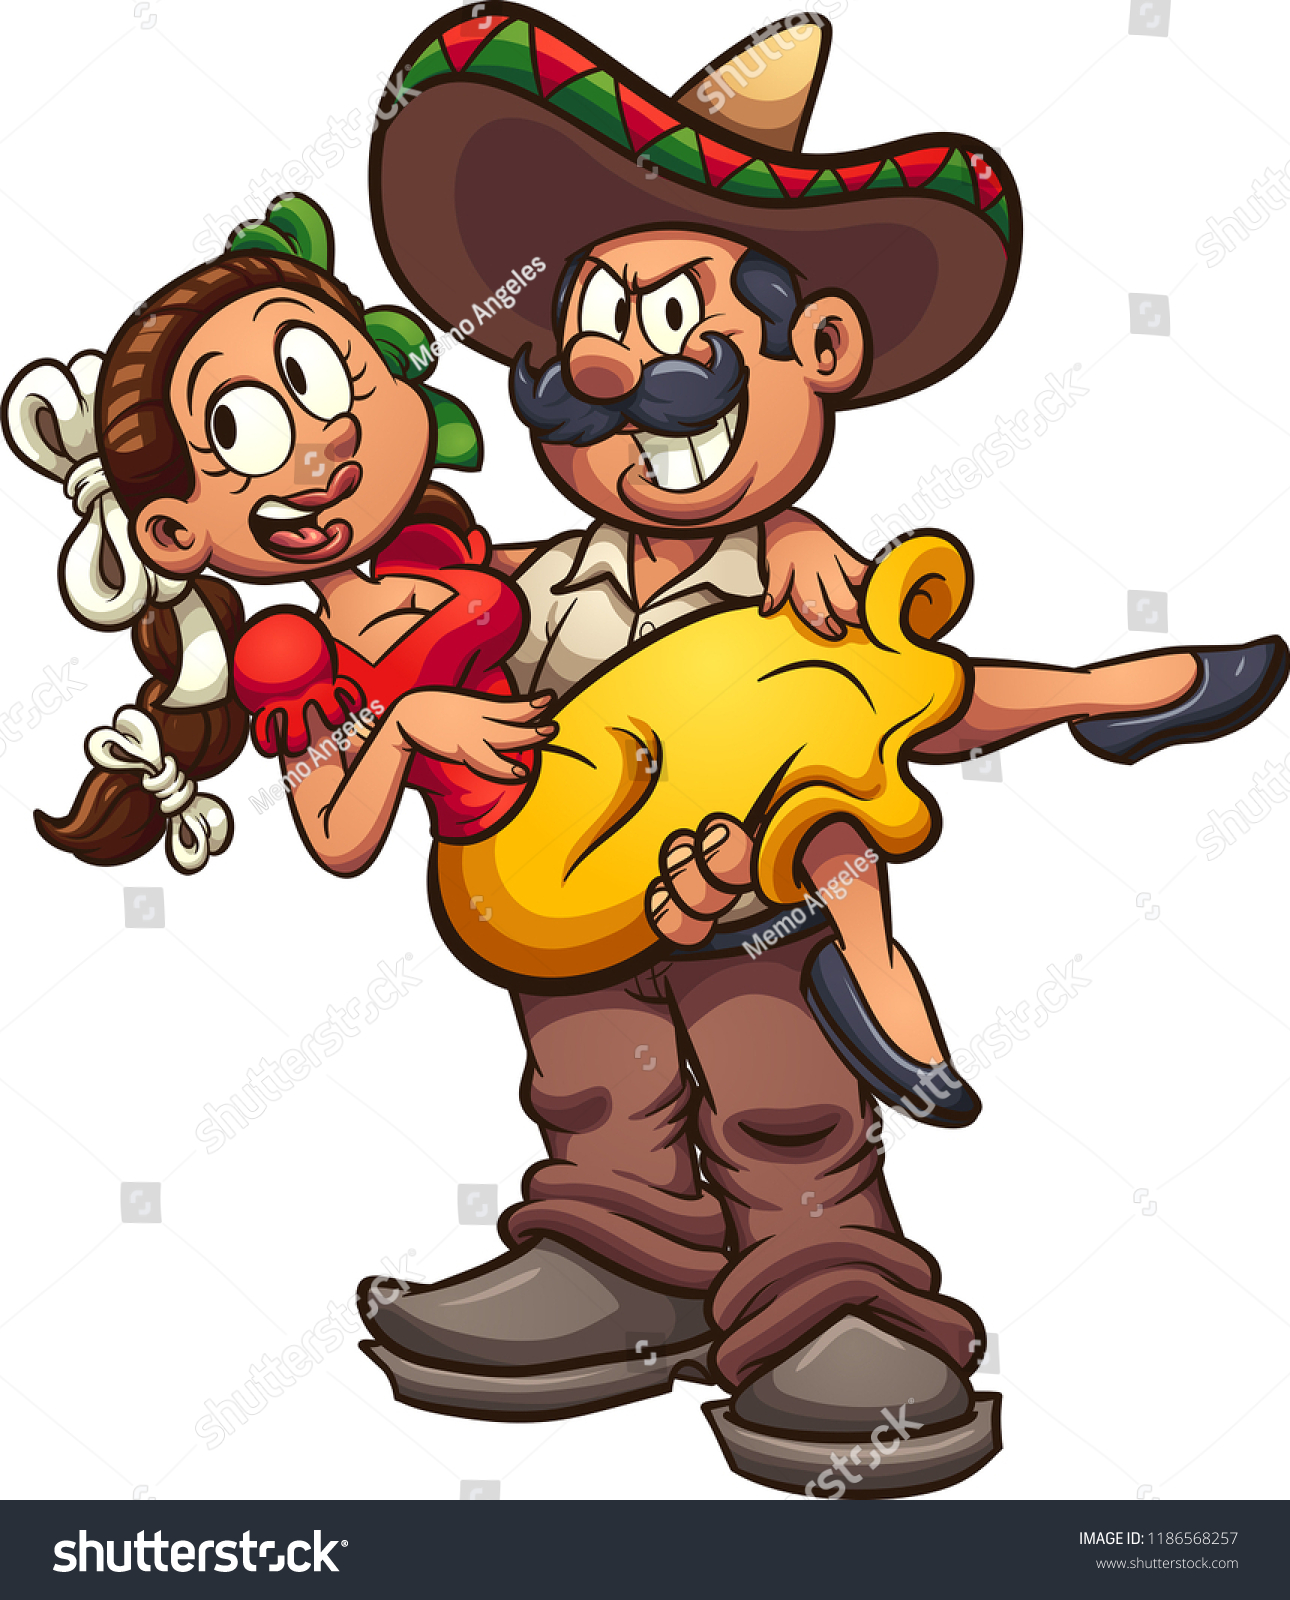 https://image.shutterstock.com/z/stock-vector-mexican-macho-man-carrying-a-beautiful-woman-vector-clip-art-illustration-with-simple-gradients-1186568257.jpg